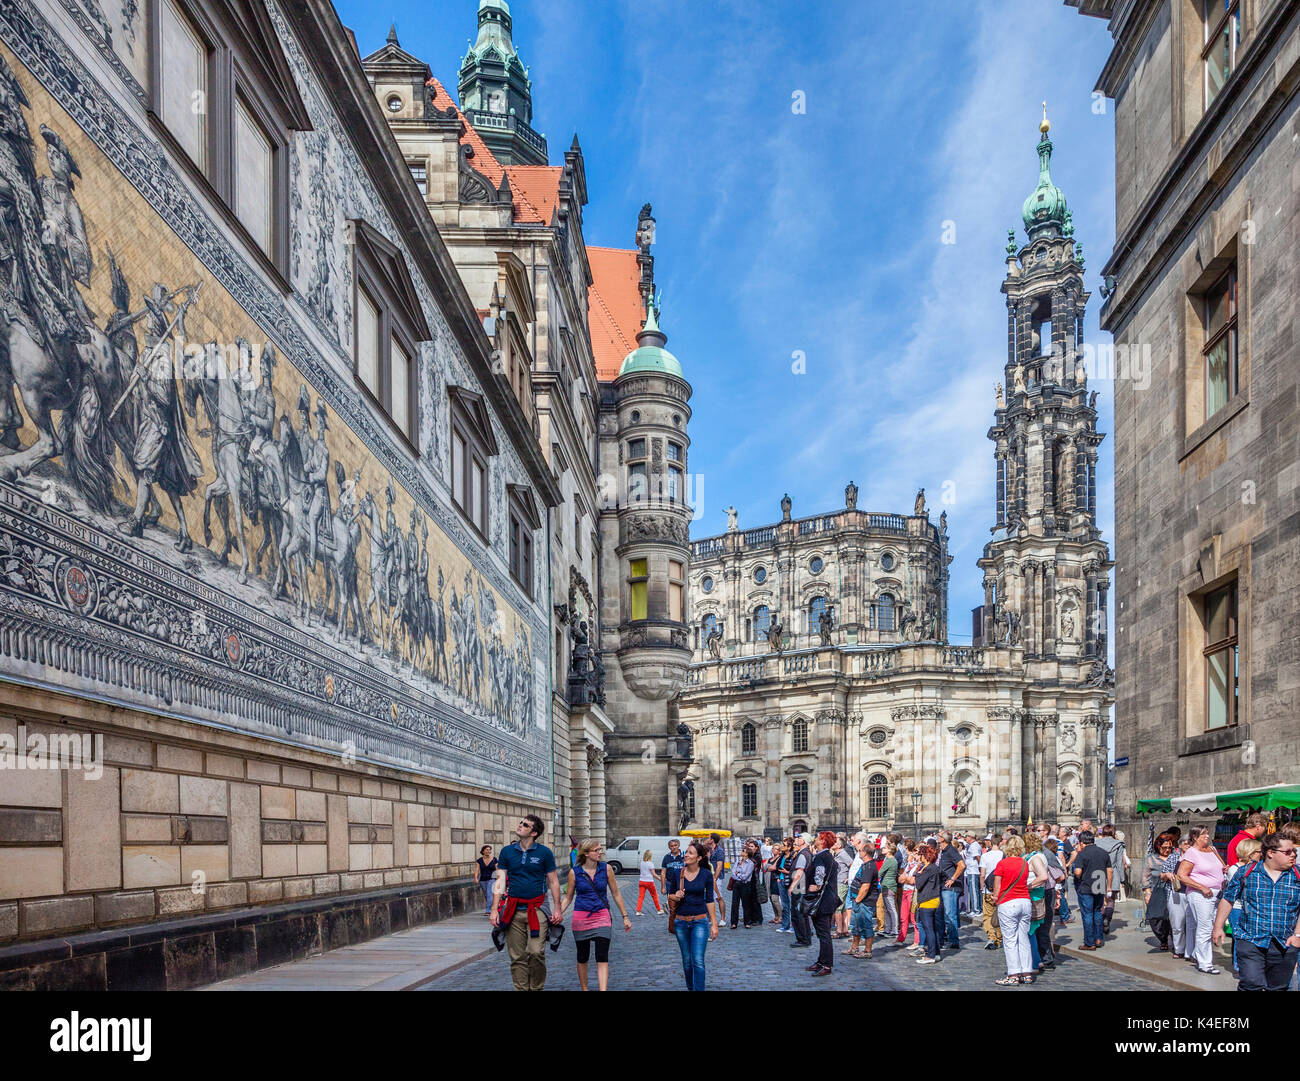 Germany, Saxony, Dresden, view of the 'Fürstenzug' Procession of Princes, a 102 metre long mural of a mounted procession of the rulers of Saxony, made Stock Photo